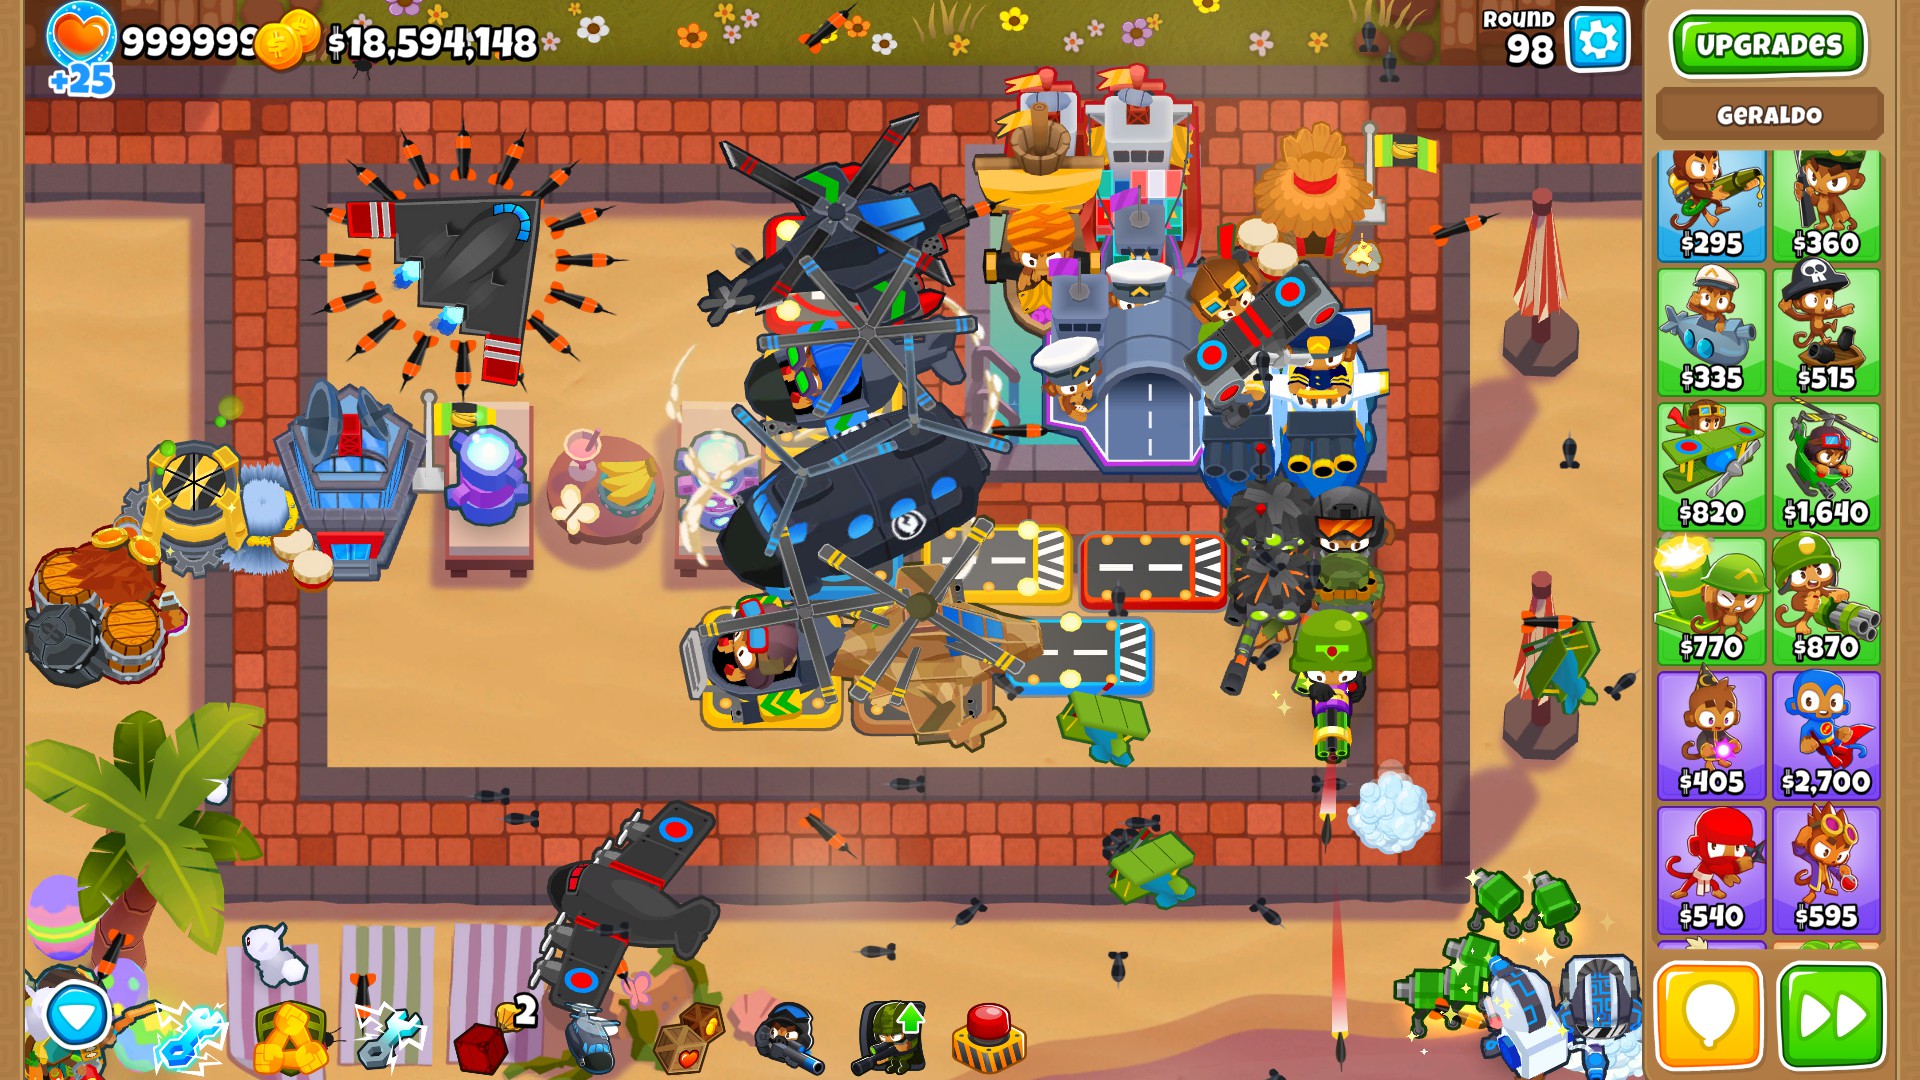 Bloons TD 6 Geraldo Tier Specials + Tower Details & Upgrade - Effects for Military Towers - AAD2CC9